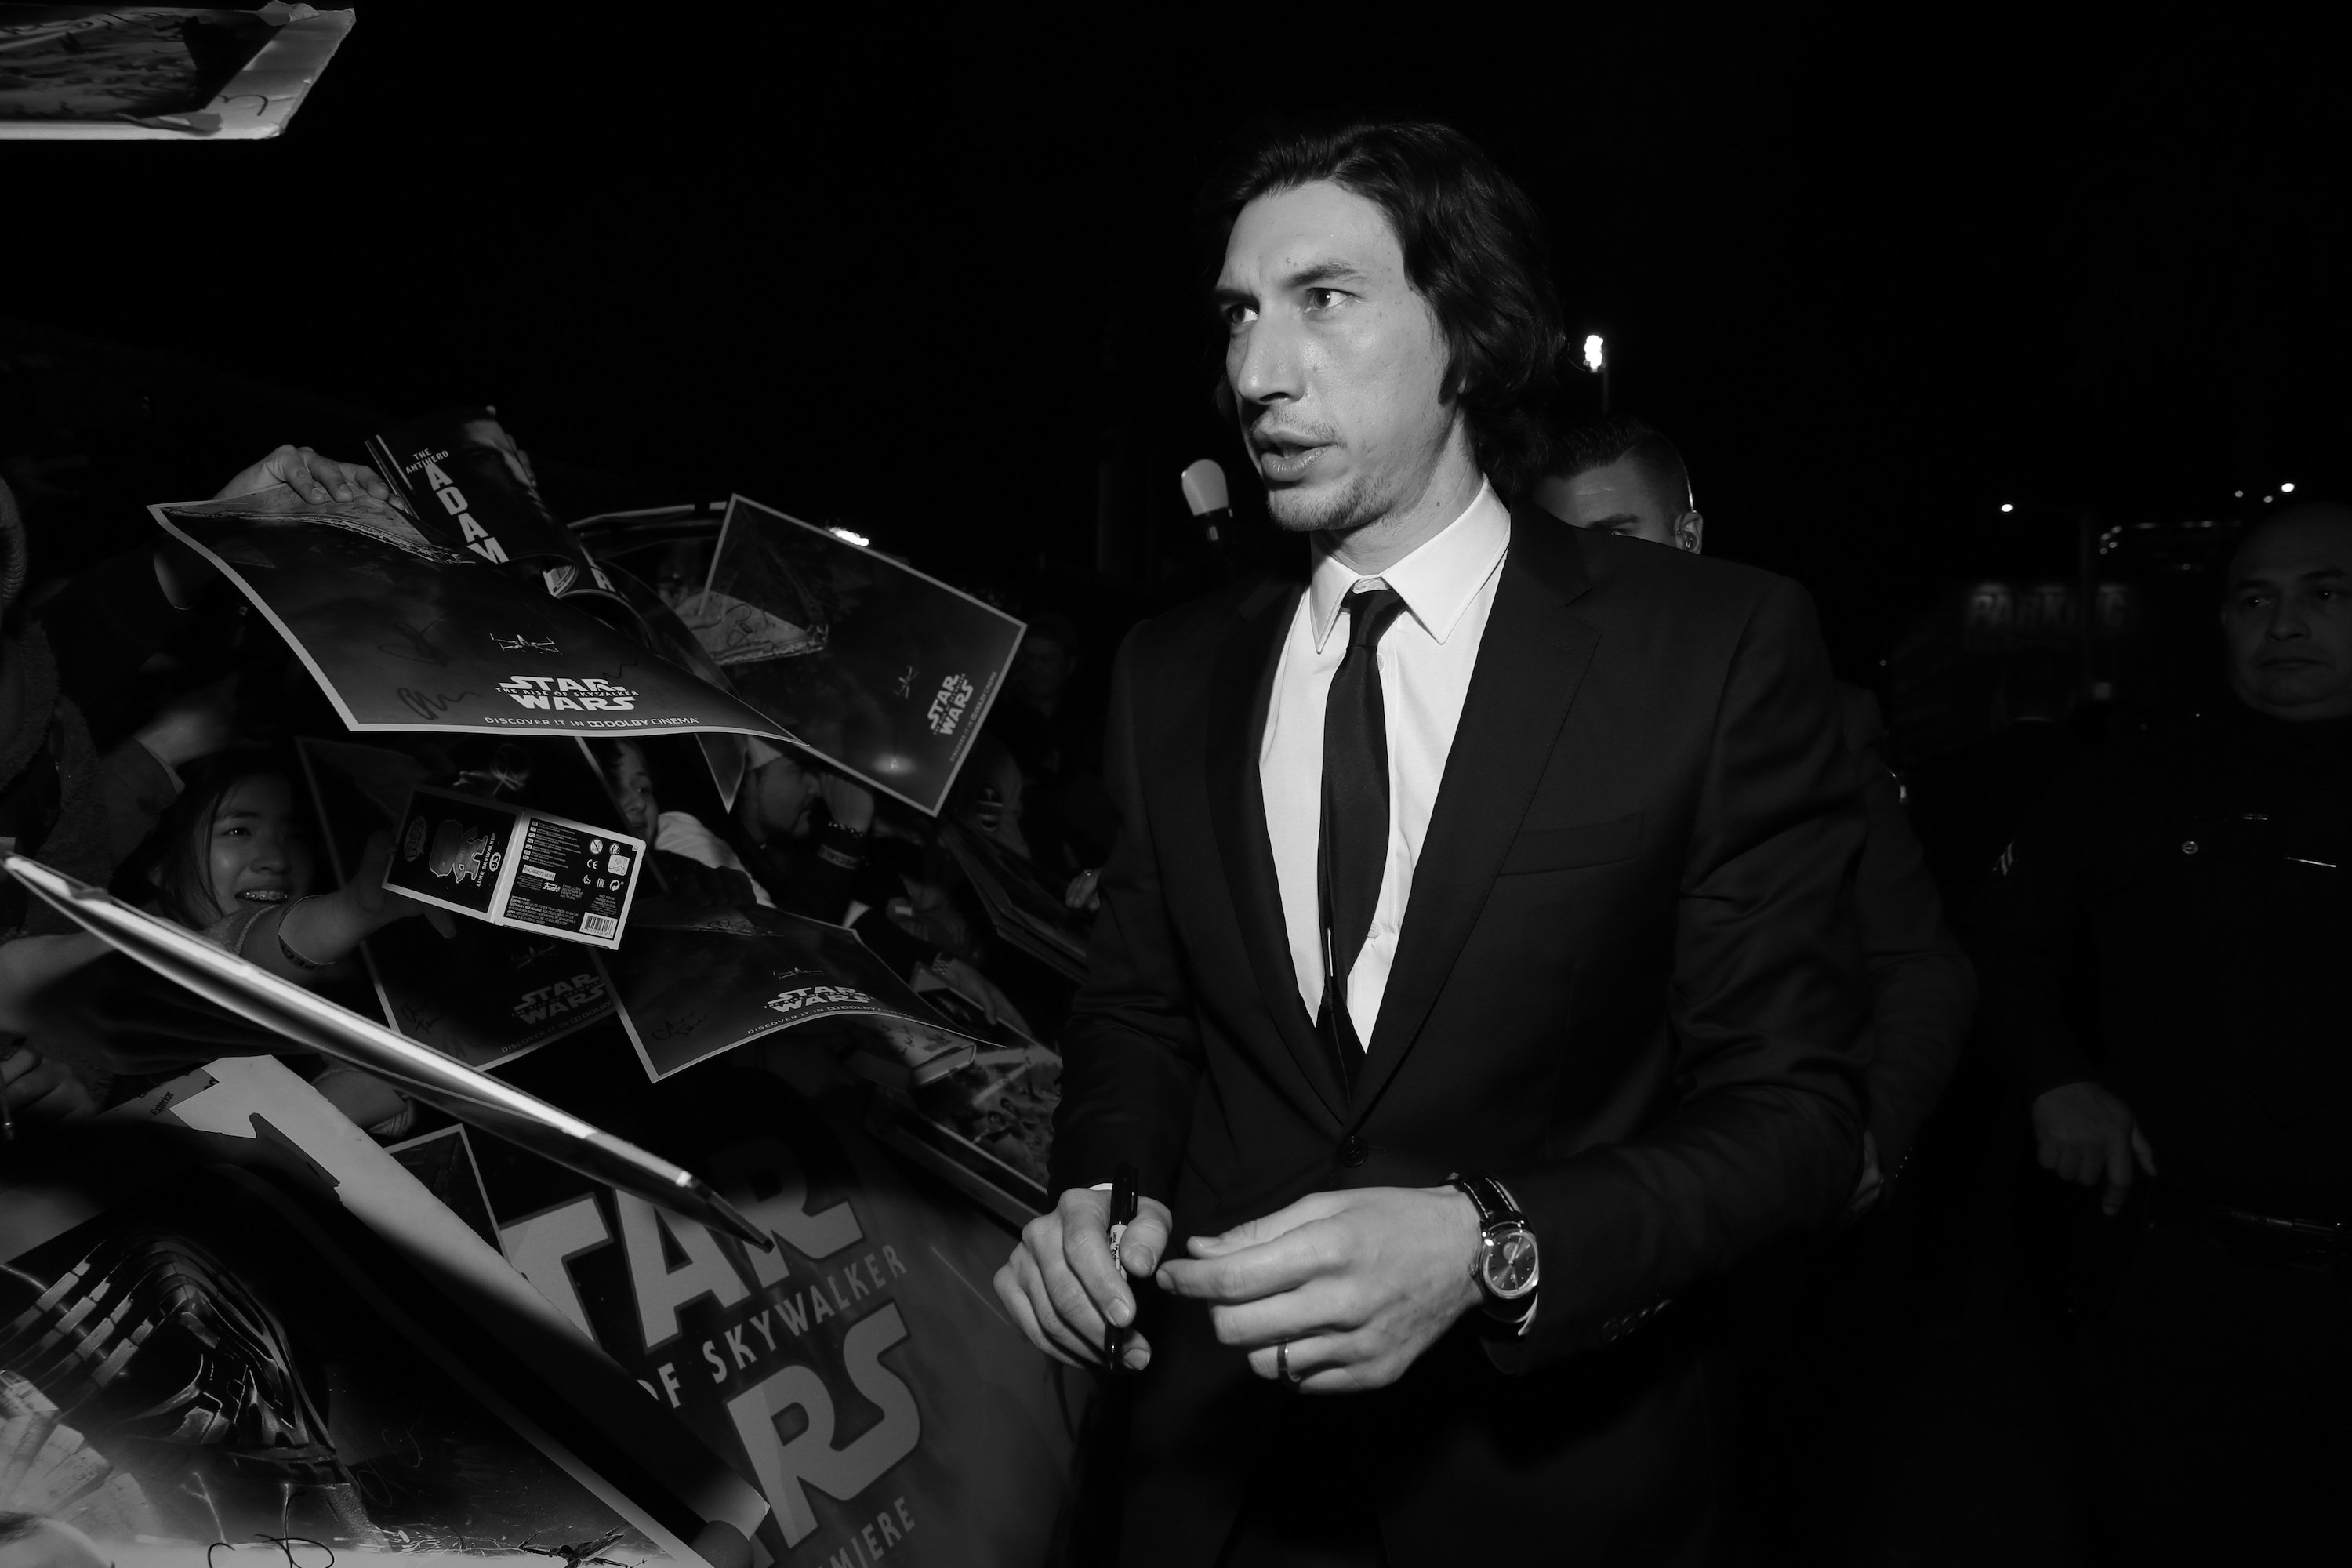 ‘Star Wars’: Kylo Ren Has a Really Depressing Backstory According to Adam Driver